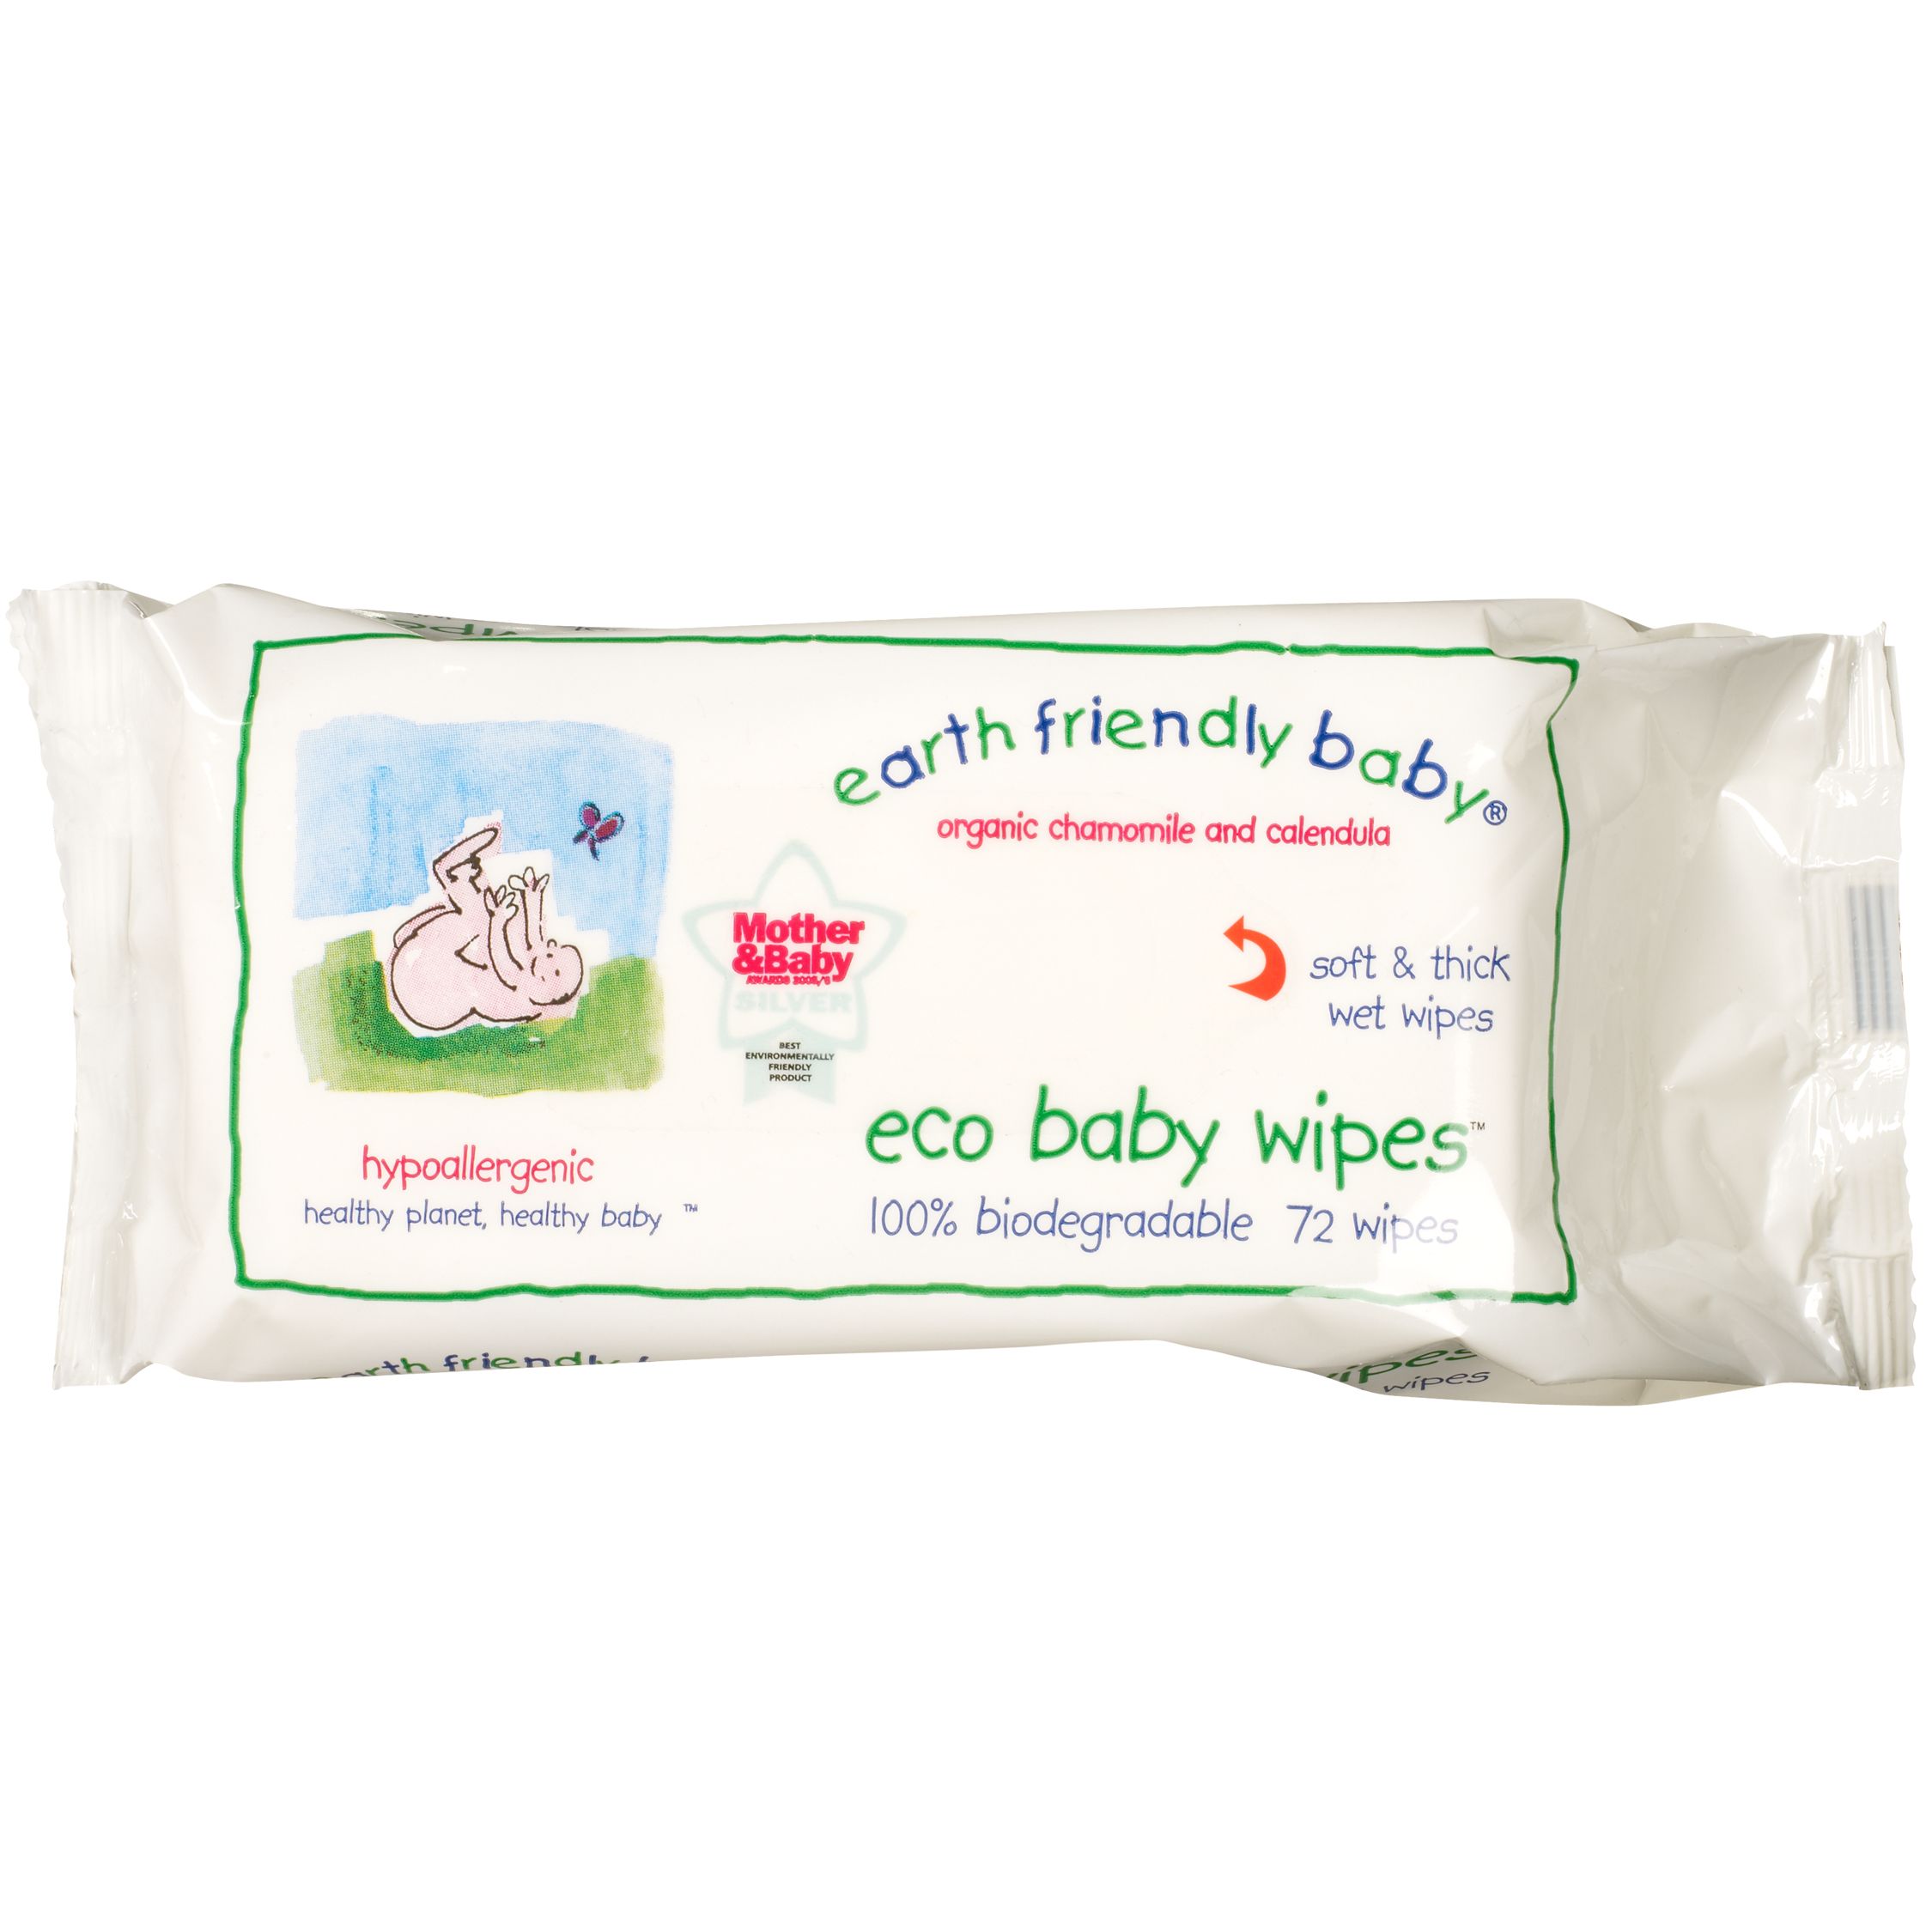 John Lewis Earth Friendly Baby Chamomile Baby Wipes